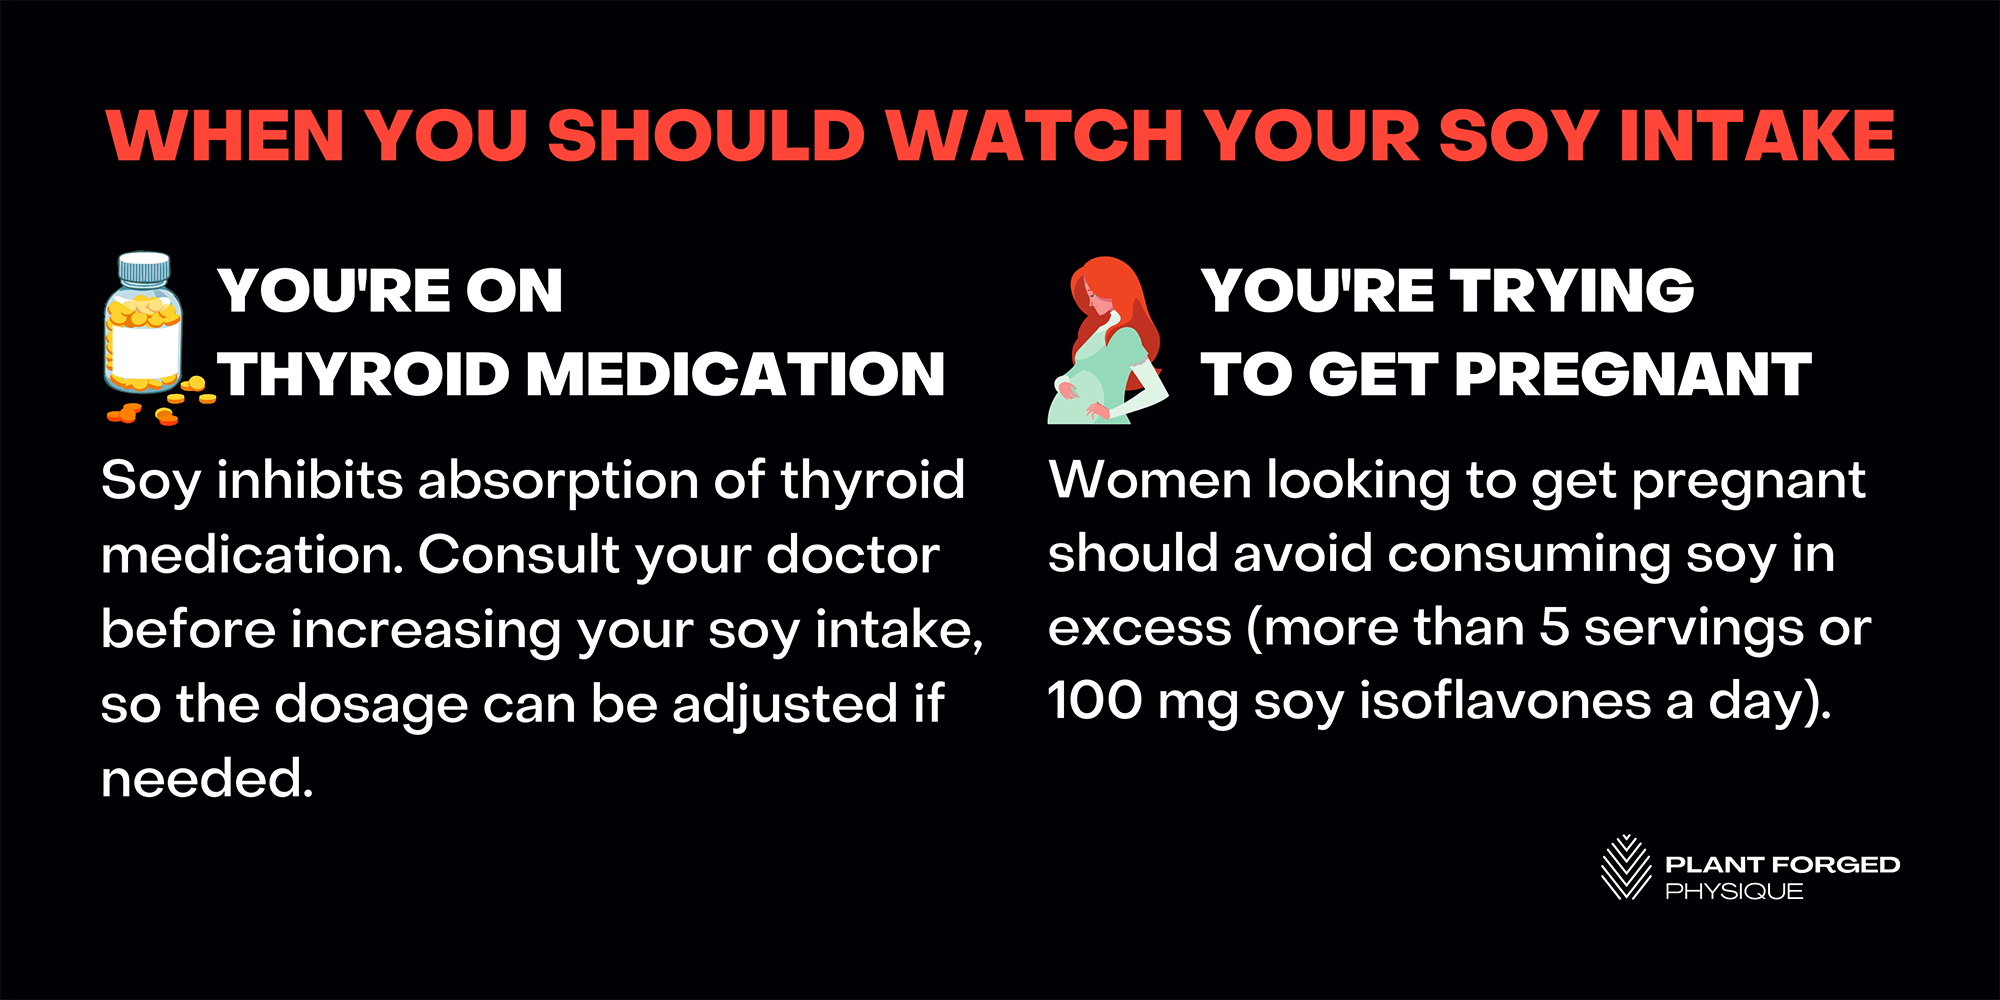 When you should watch your soy intake